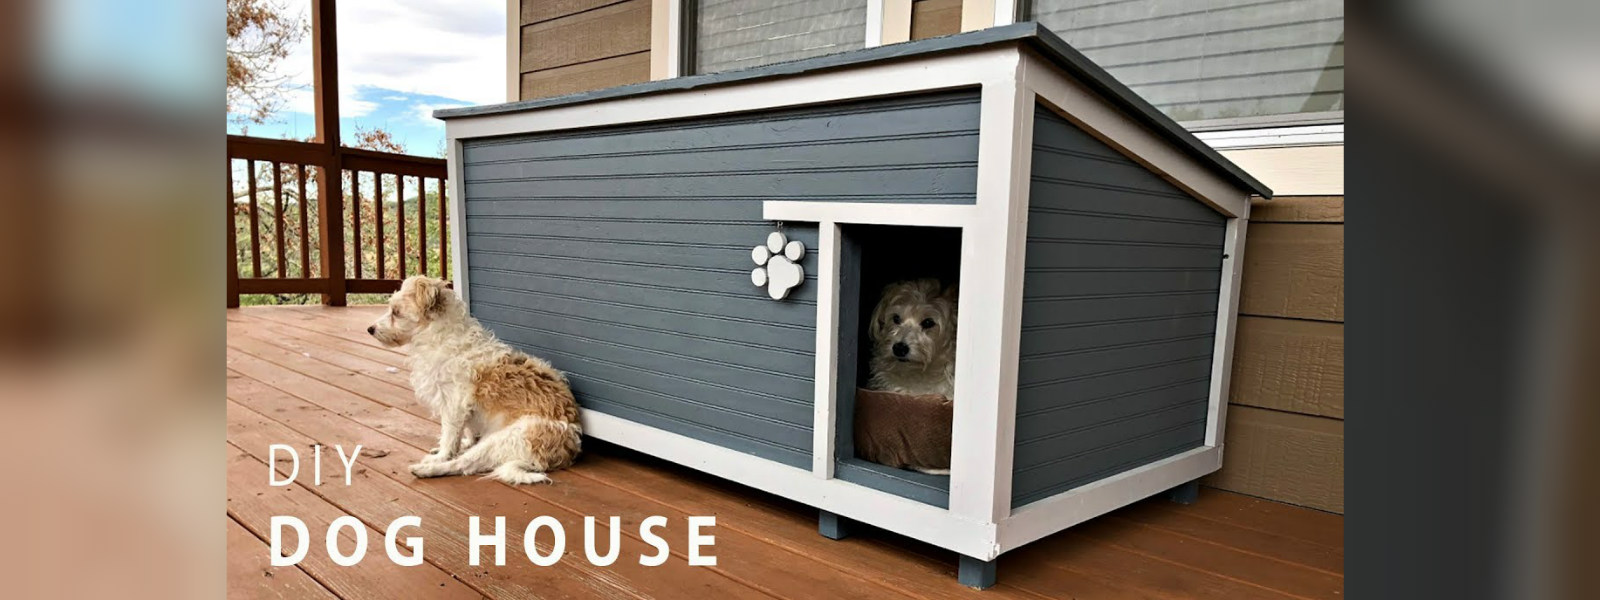 How to Build a Dog House...